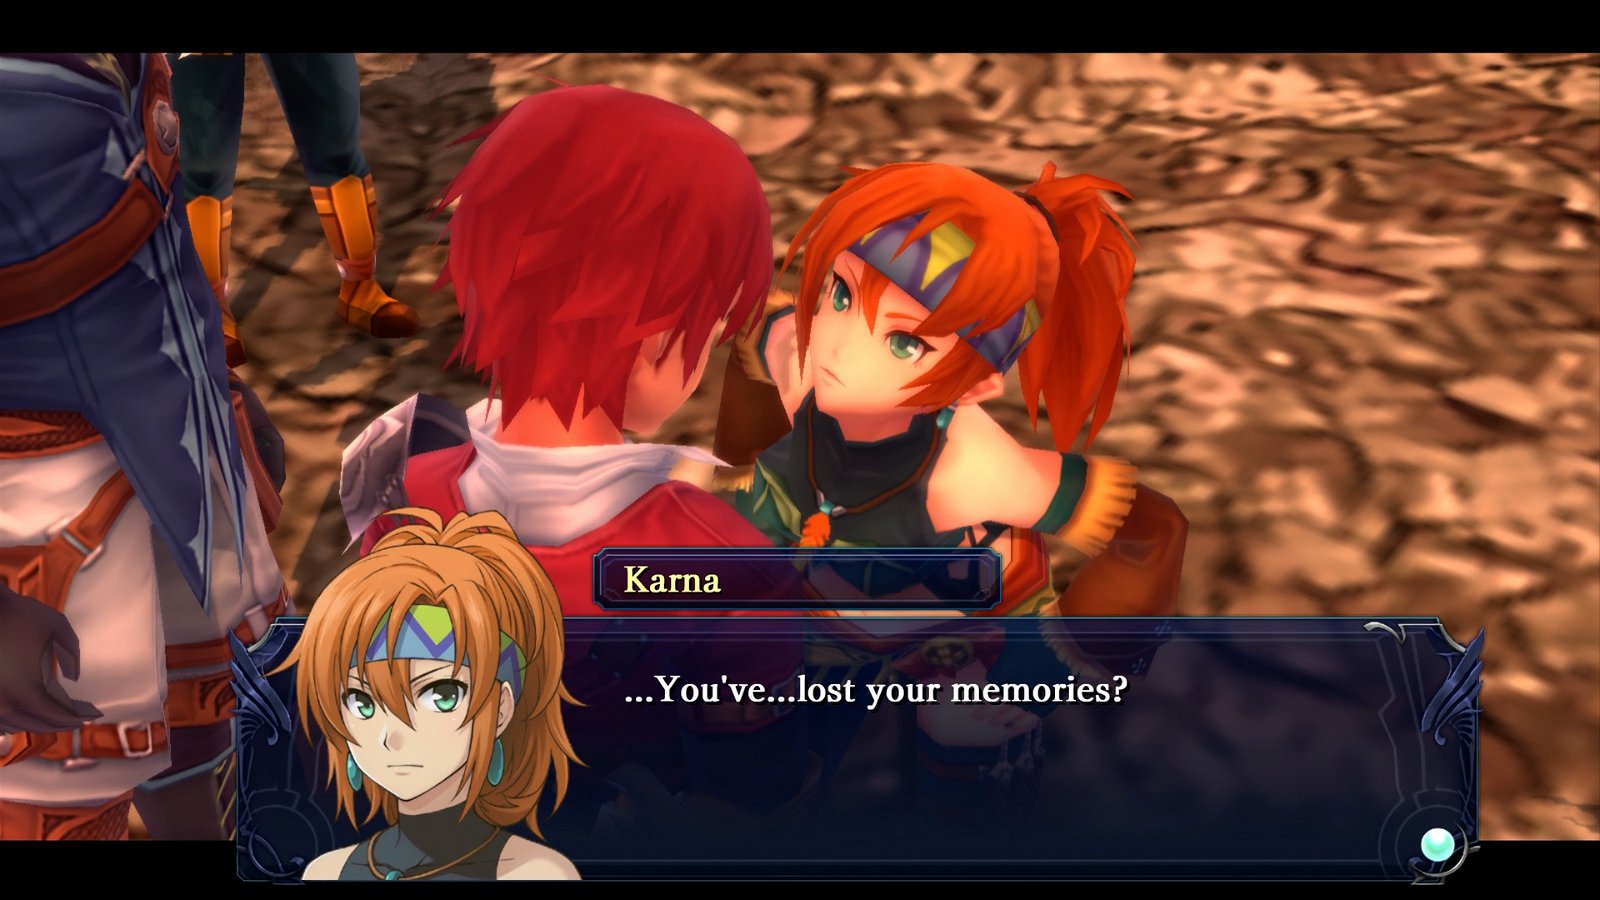 Ys Memories of Celceta Remaster, Ys: Memories of Celceta Remaster, price, gameplay, features, release date, pre-order, PS4, PlayStation 4, US, North America, Europe, EU, Xseed Games